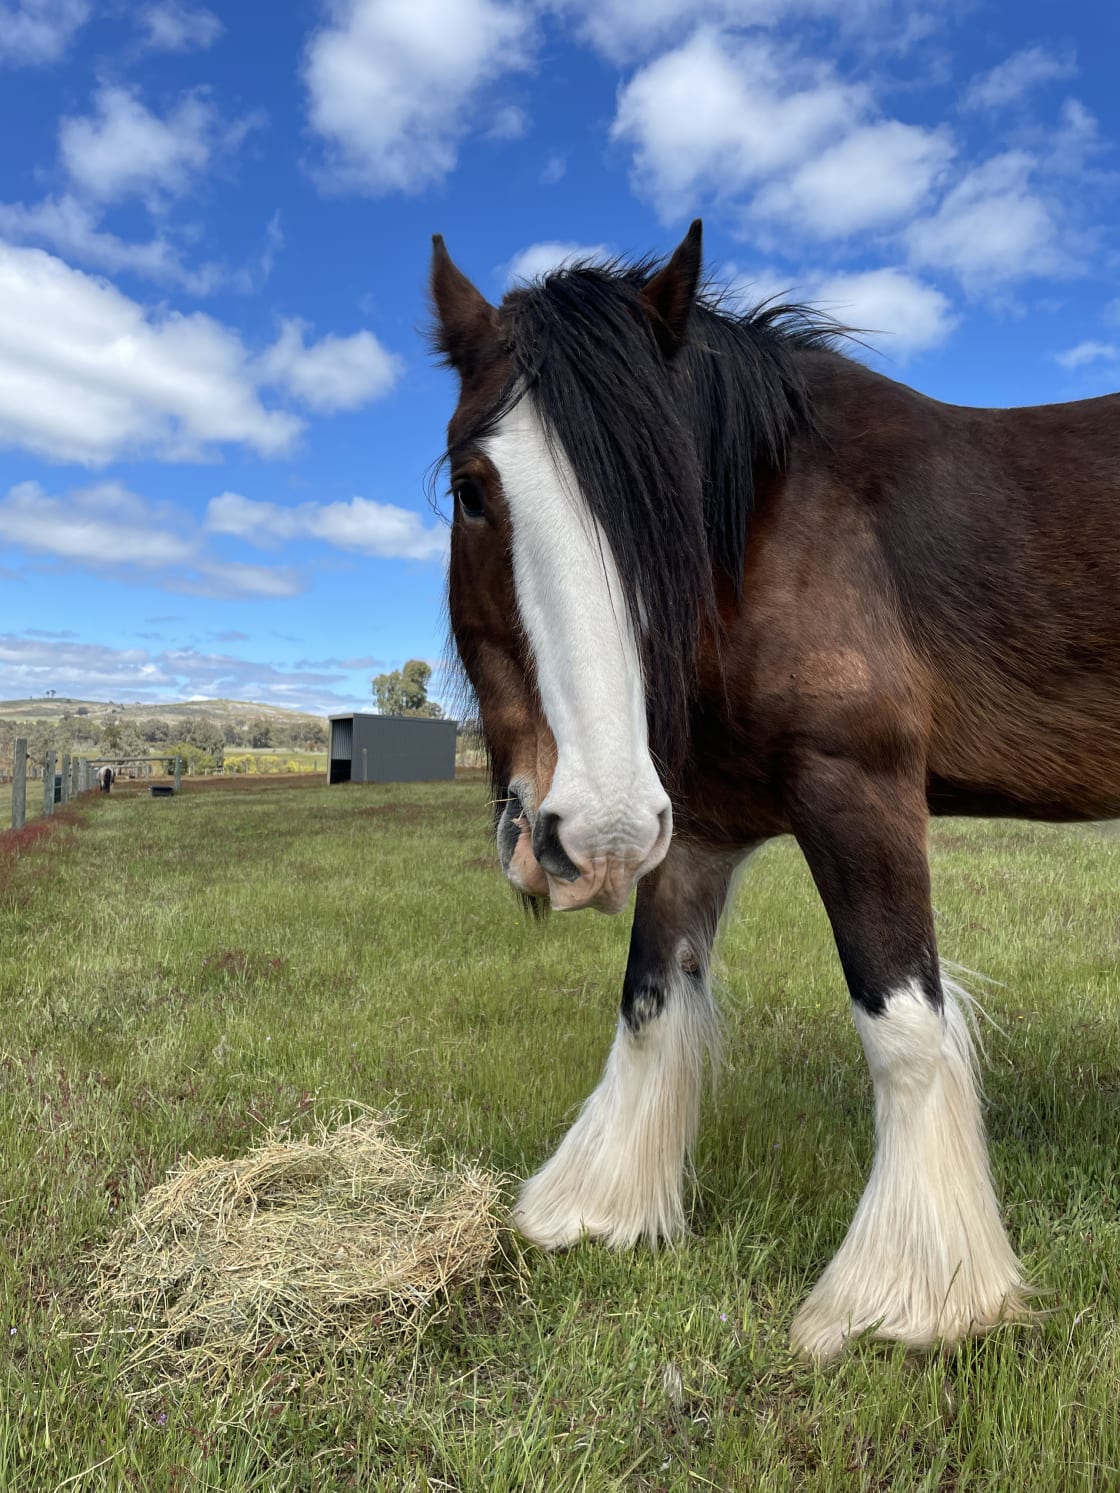 Our resident Clydesdale